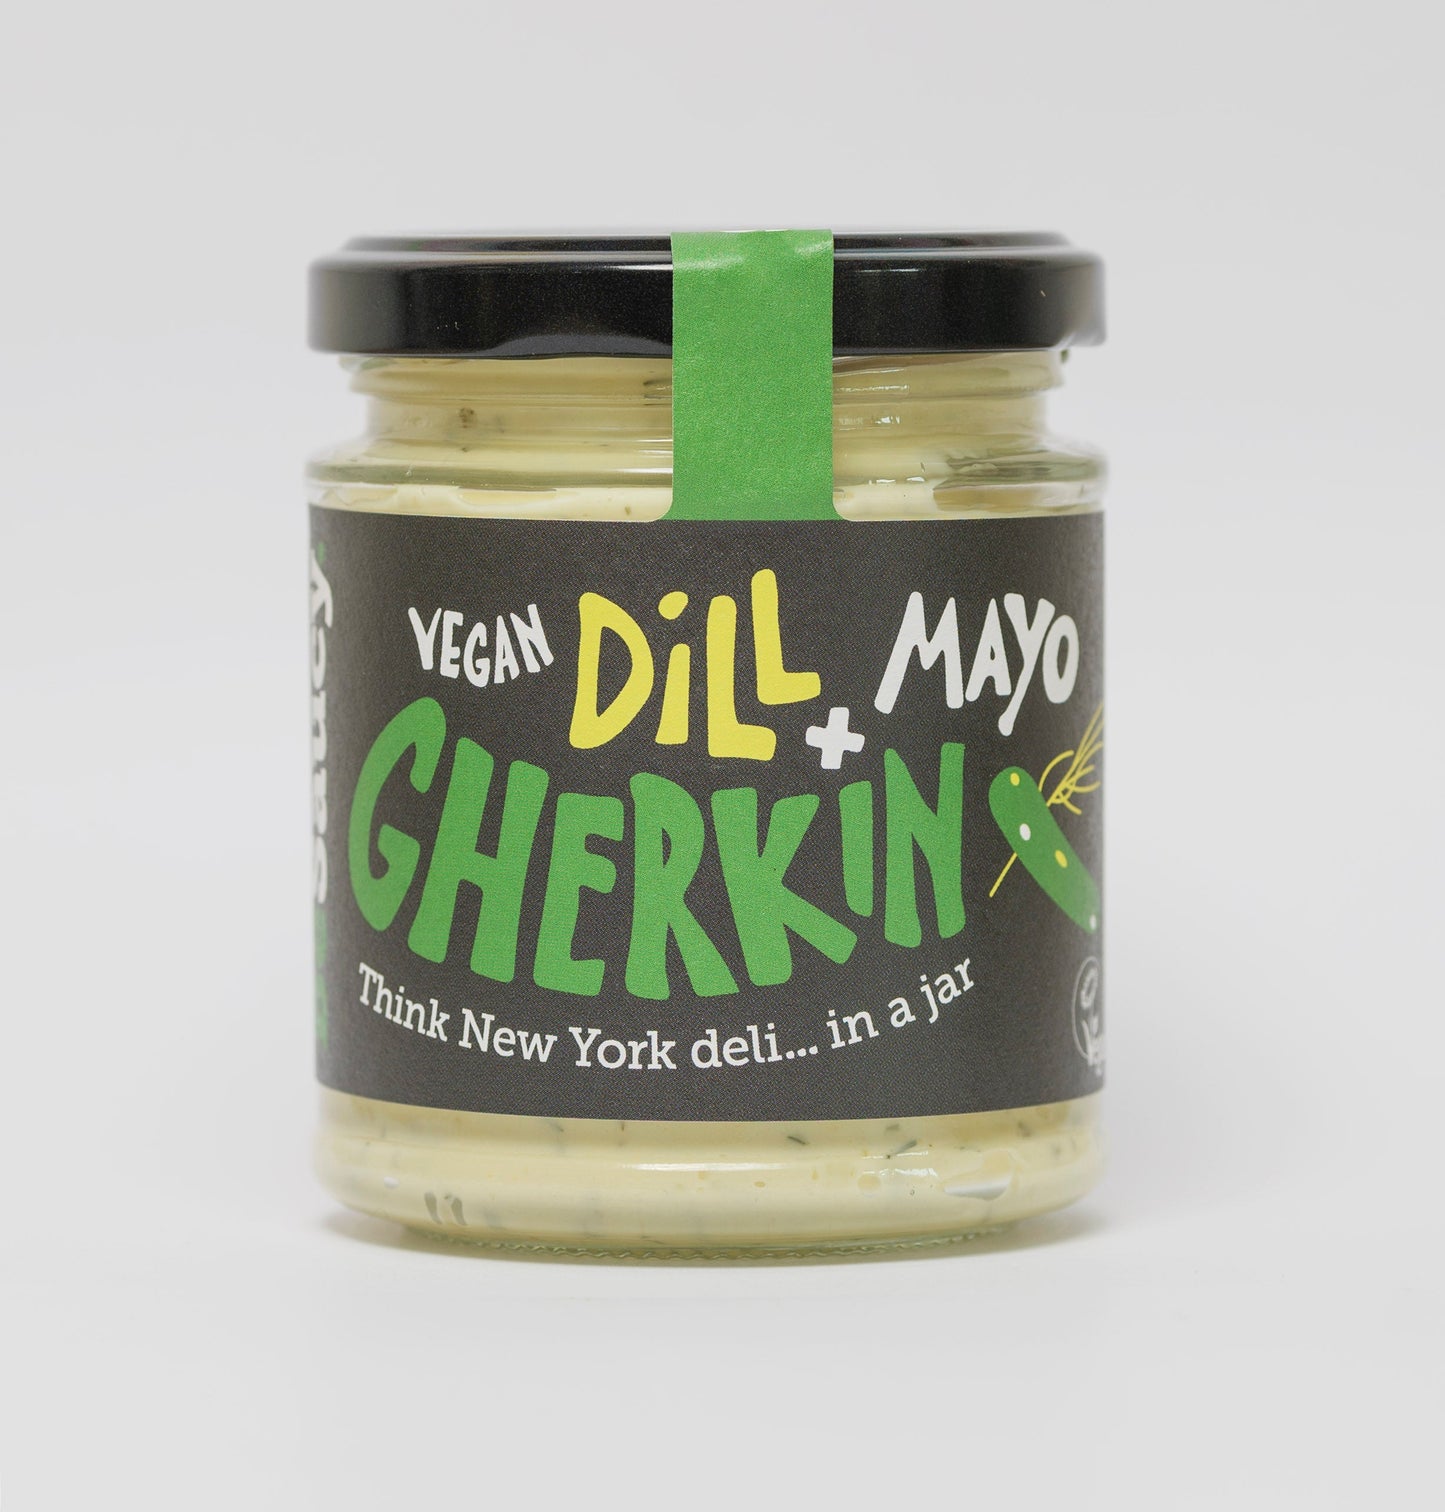 Vegan Dill and Gherkin Mayonnaise - New York Deli Flavors in a Jar